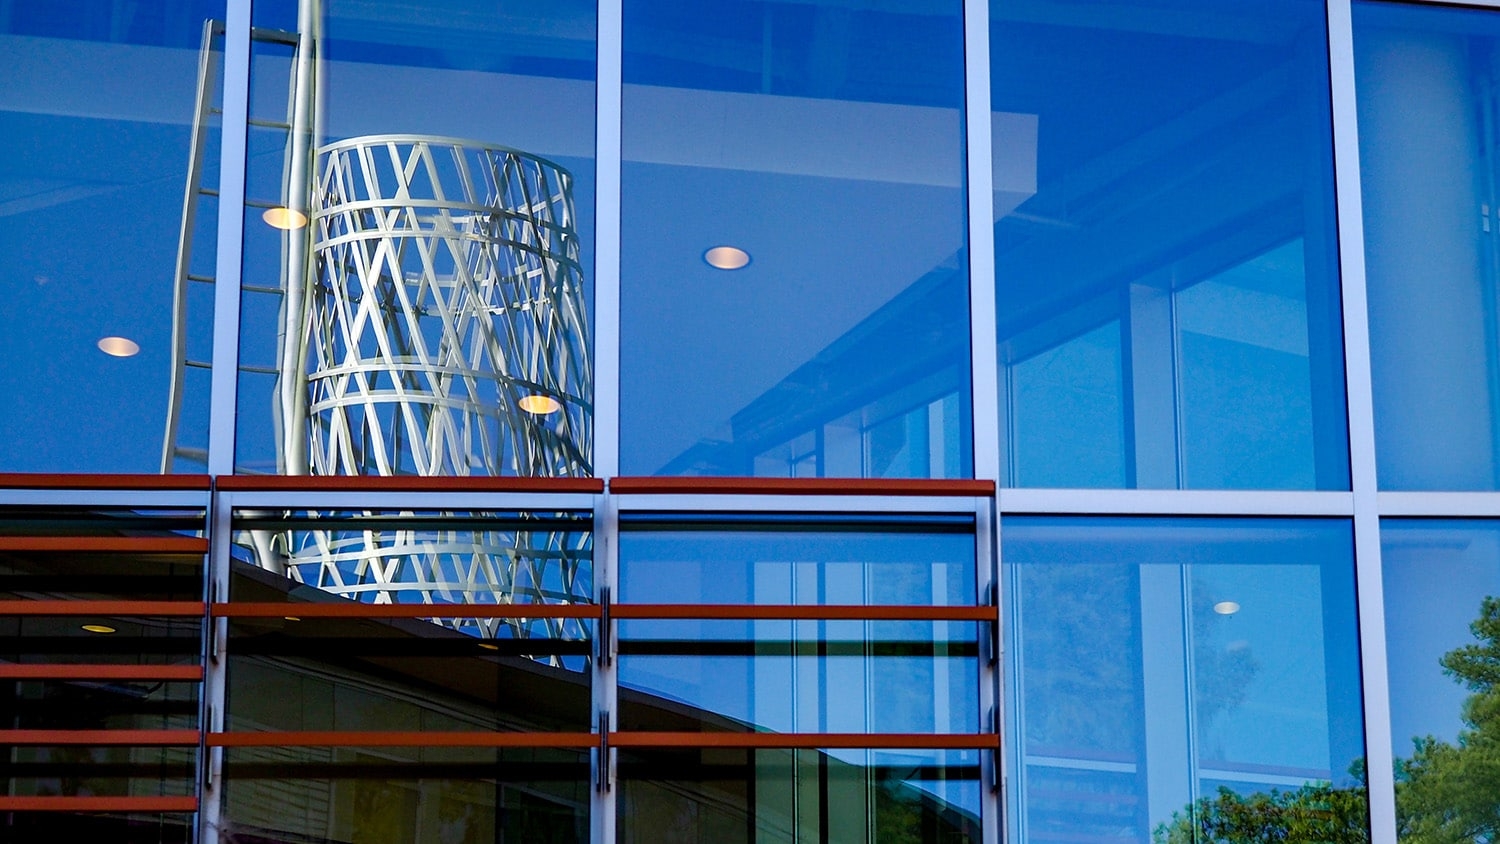 The Technology Tower is reflected in the side windows of the Talley Student Center.